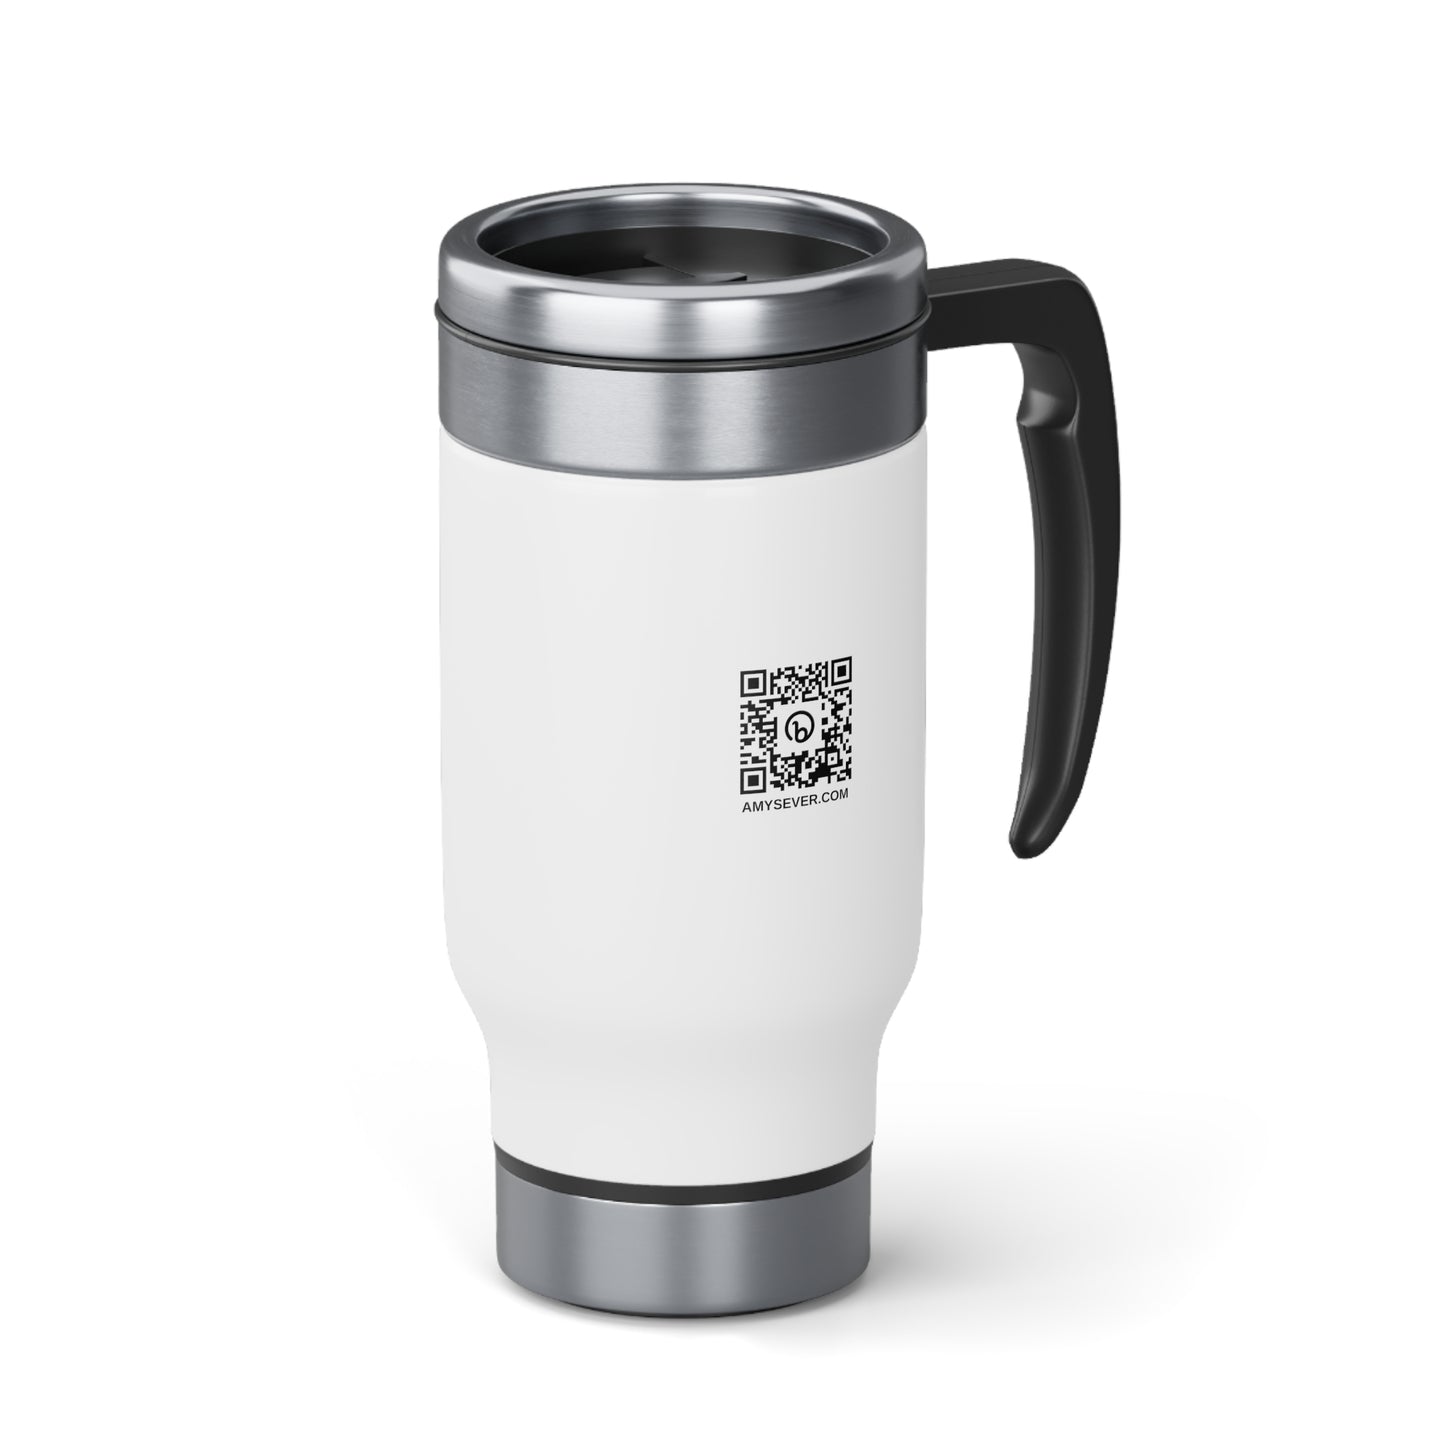 AS Logo Stainless Steel Travel Mug with Handle, 14oz